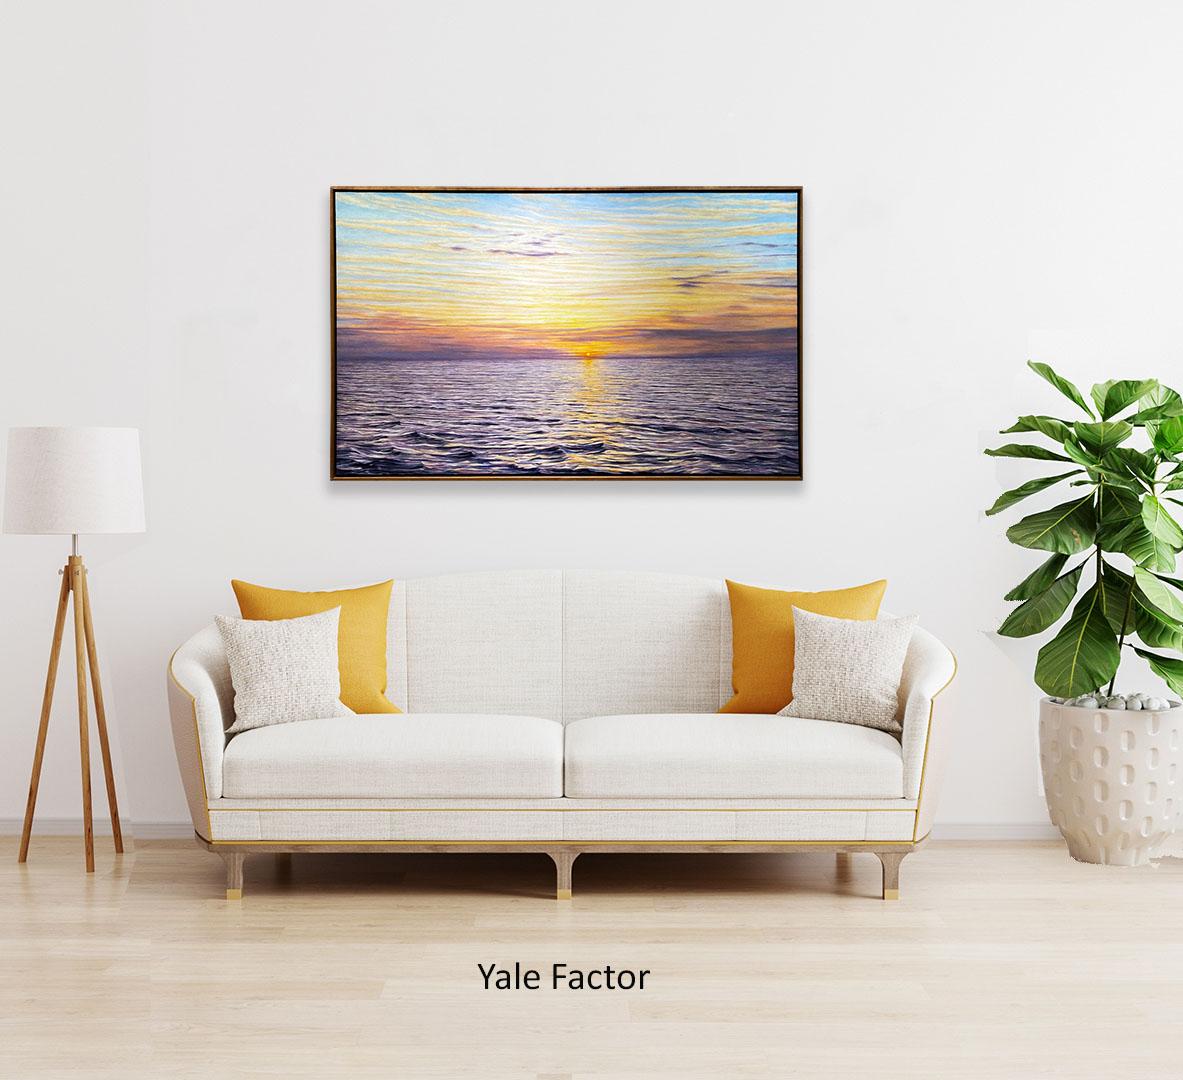 INTO THE NIGHT - Painting by Yale Factor